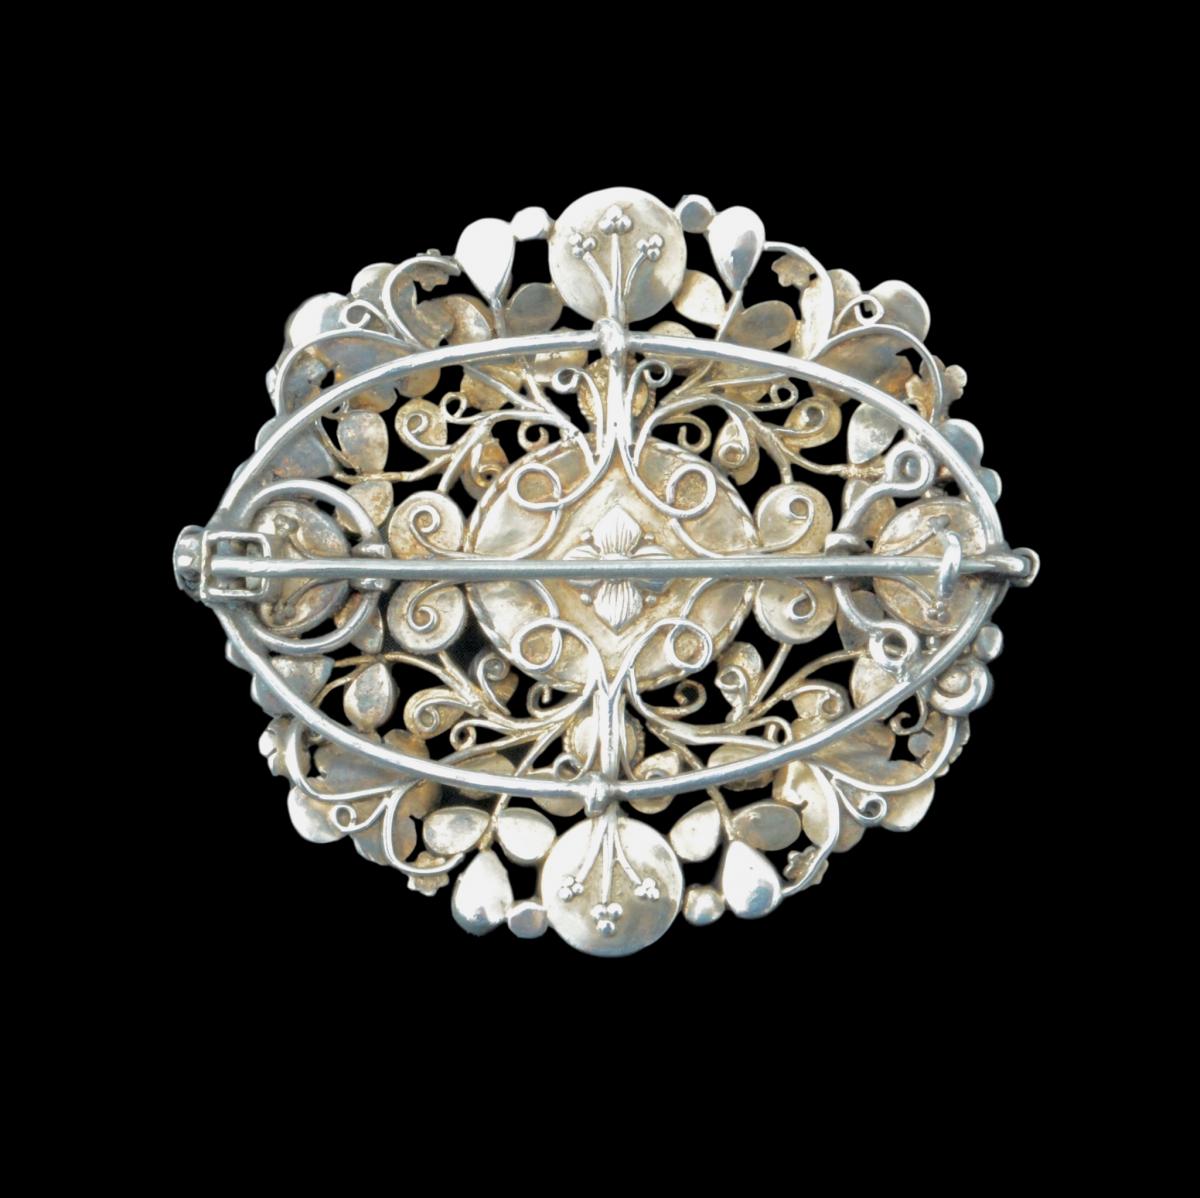 A stunning silver brooch by the Gaskins